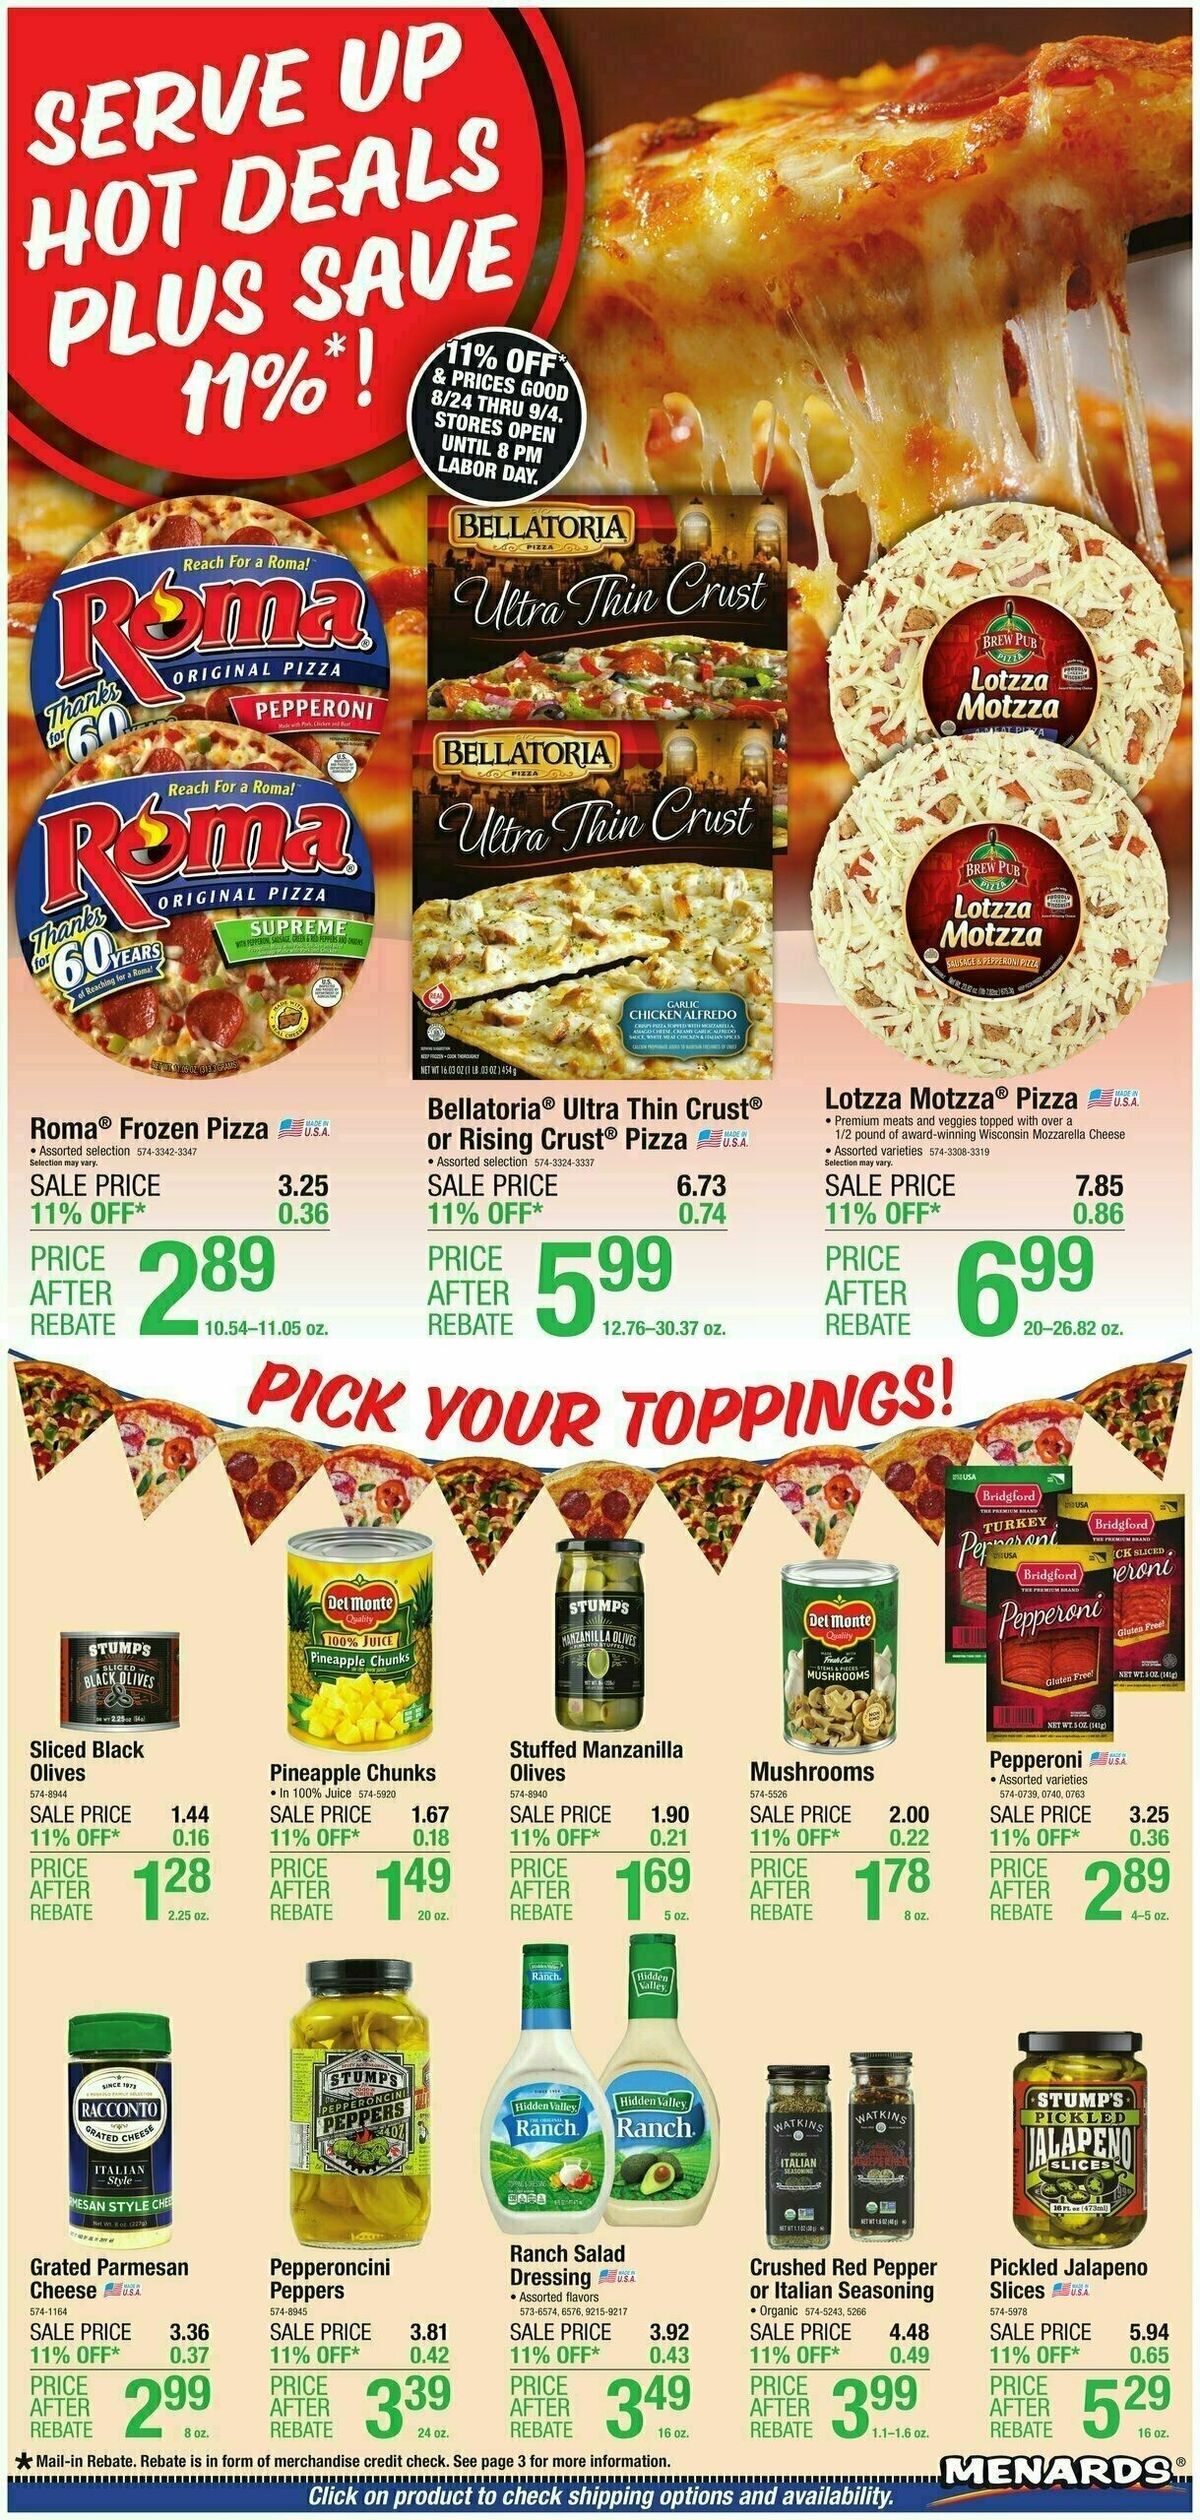 Menards Home Essentials Weekly Ad from August 23